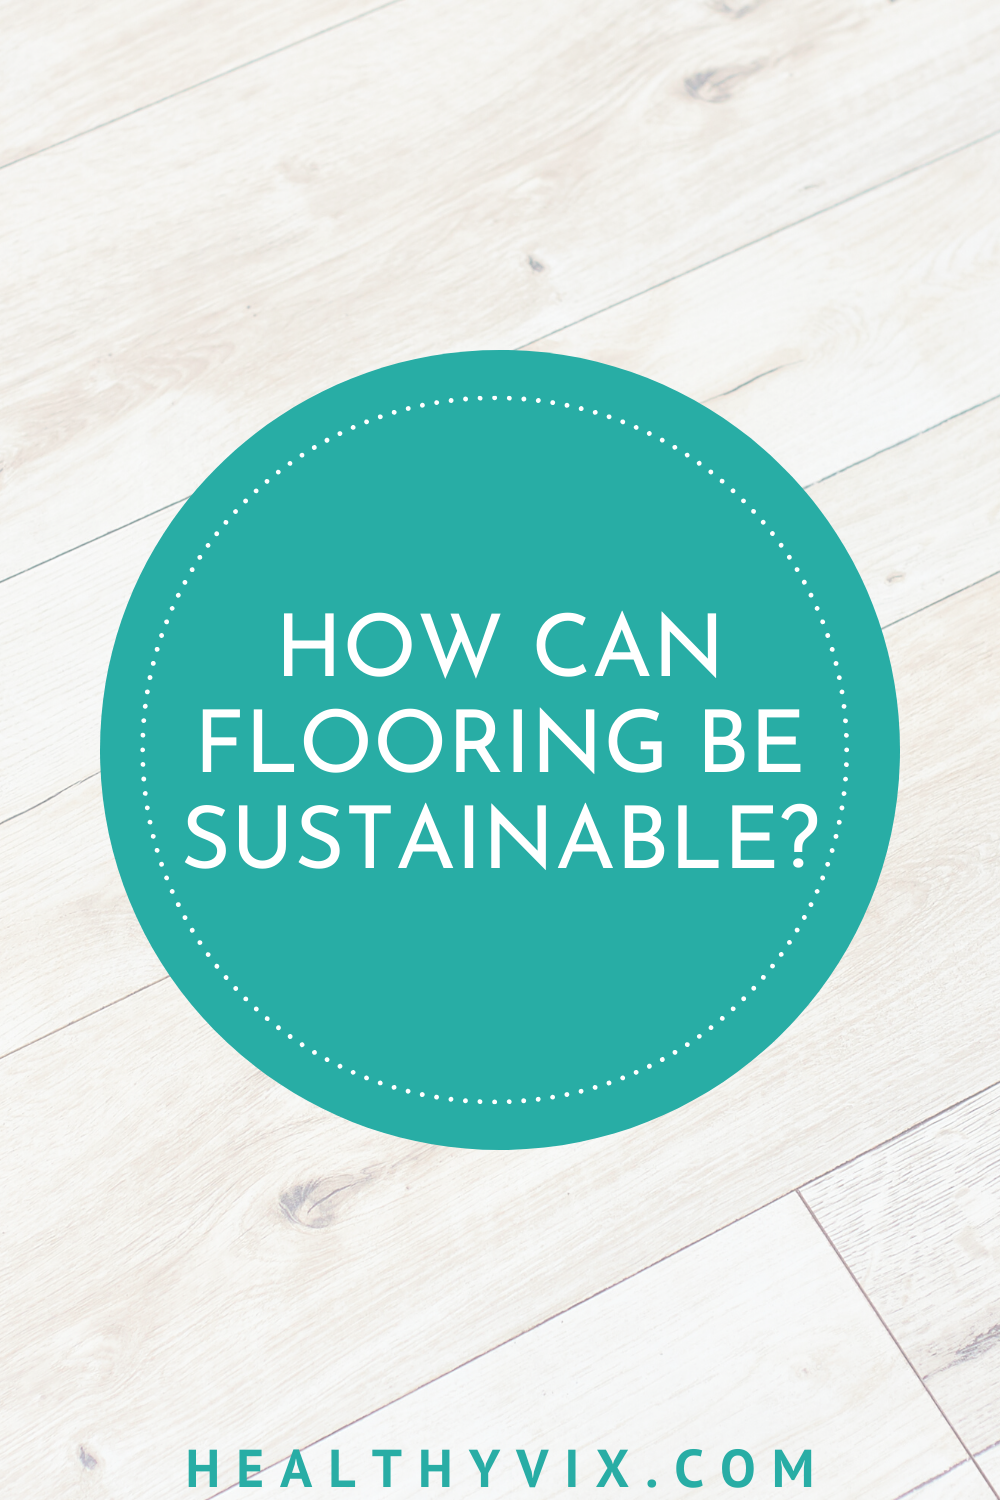 How can flooring be sustainable?